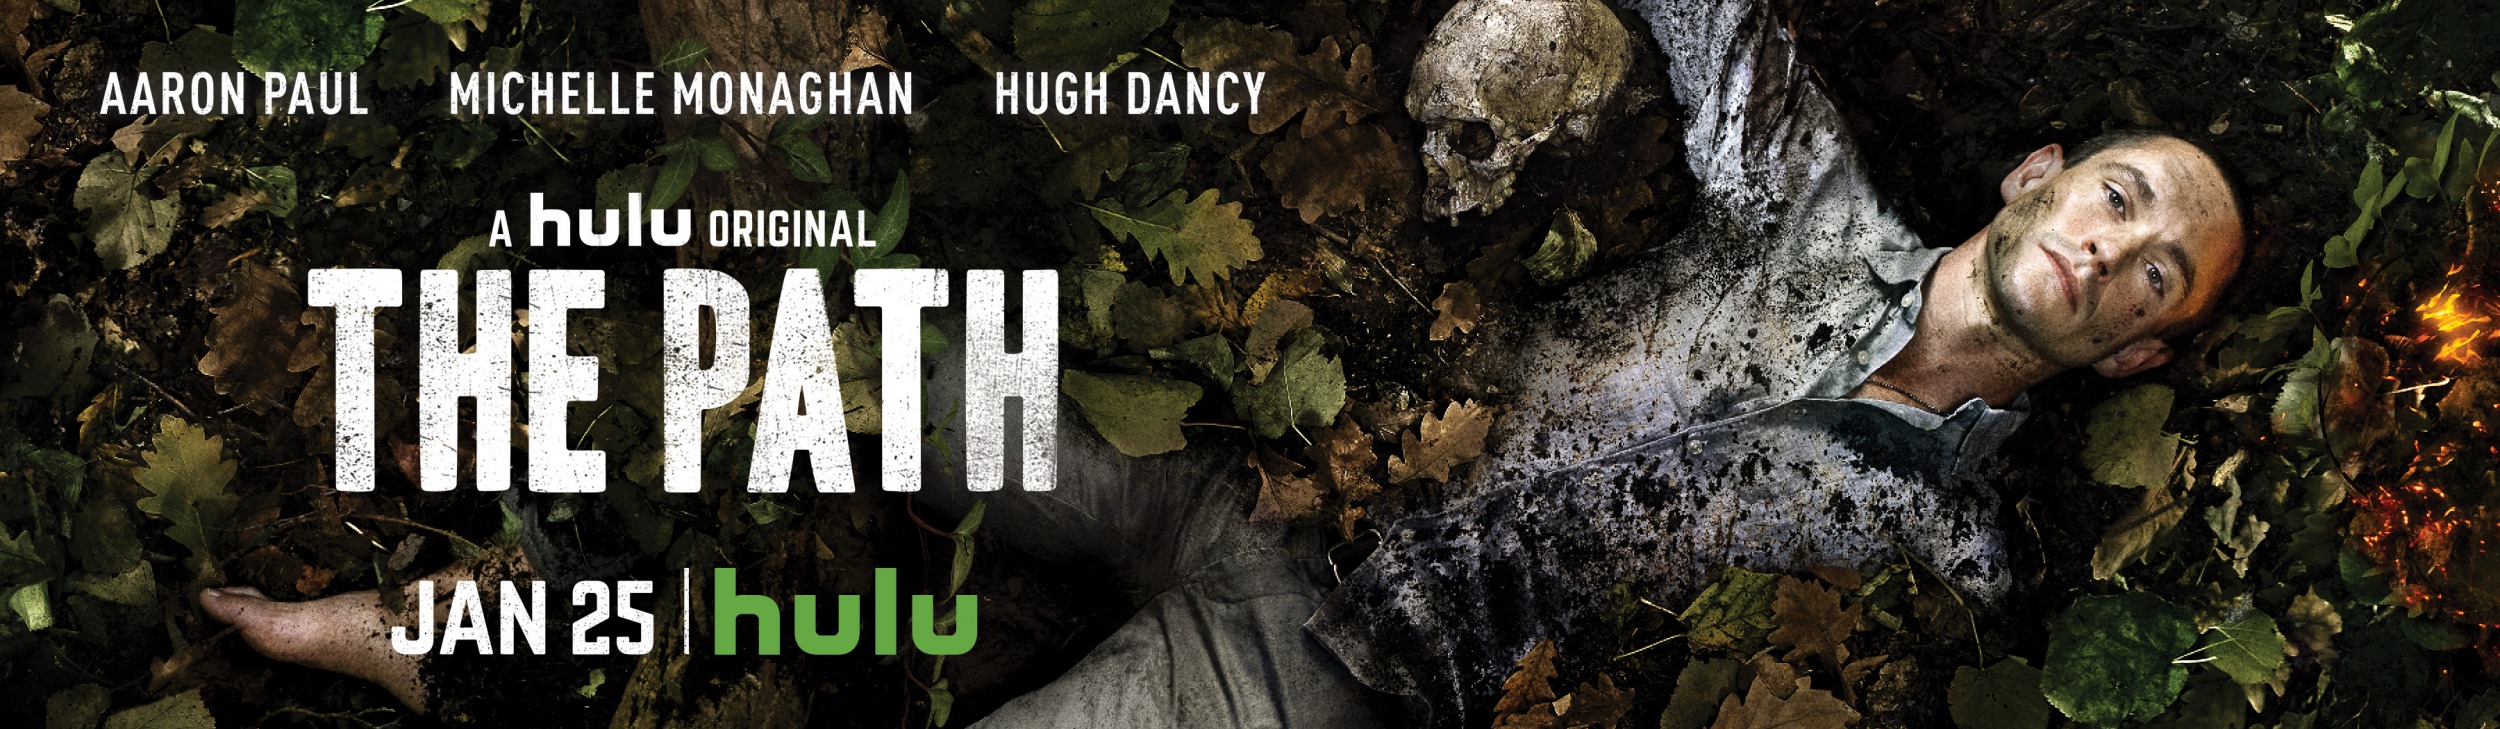 Mega Sized TV Poster Image for The Path (#6 of 12)